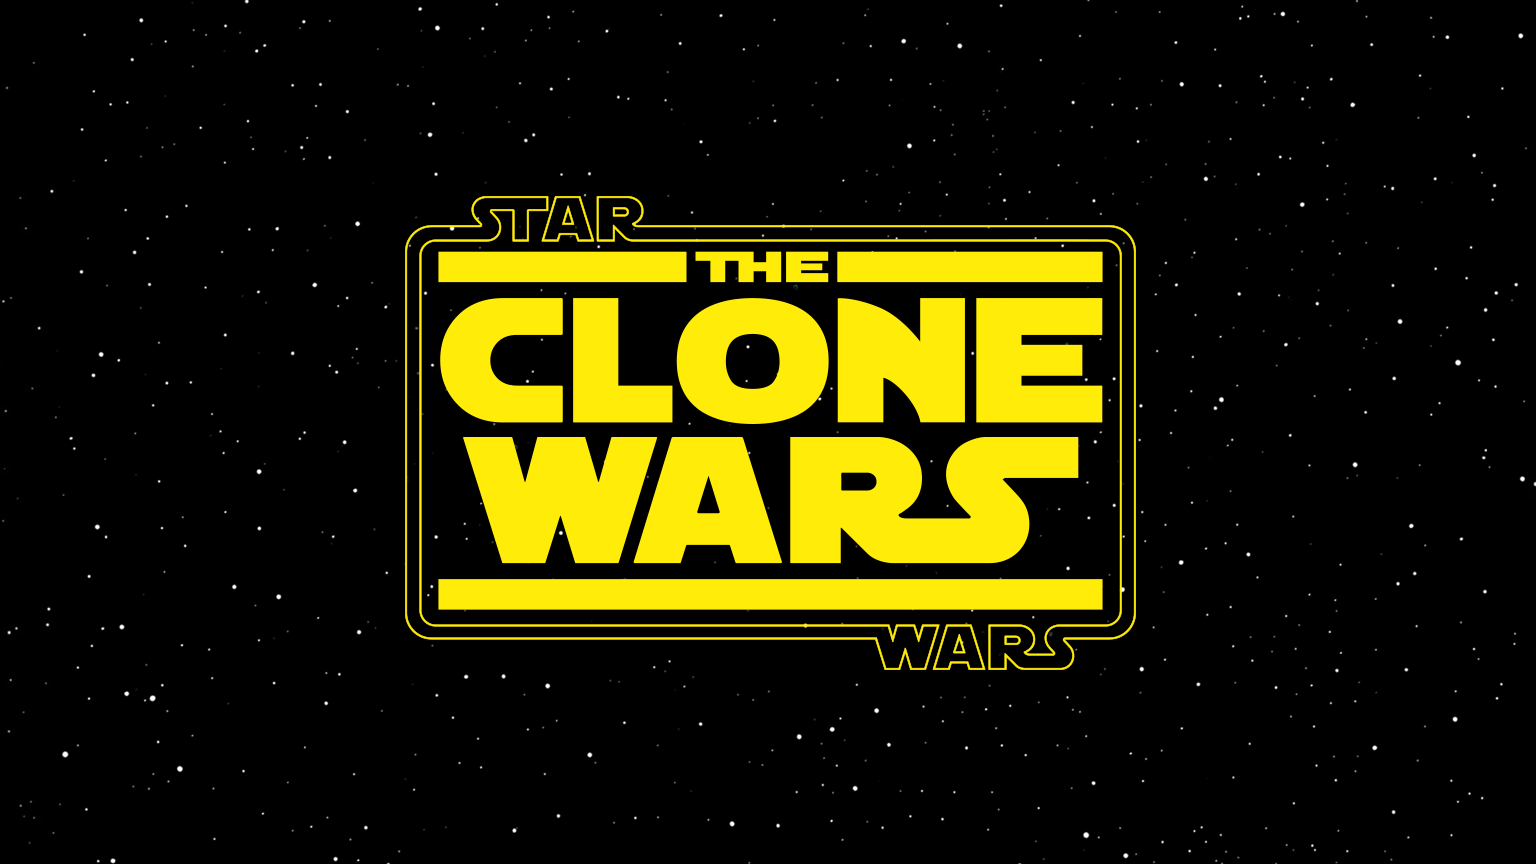 Star Wars: The Clone Wars Celebrates its 10-Year Anniversary with SDCC Panel